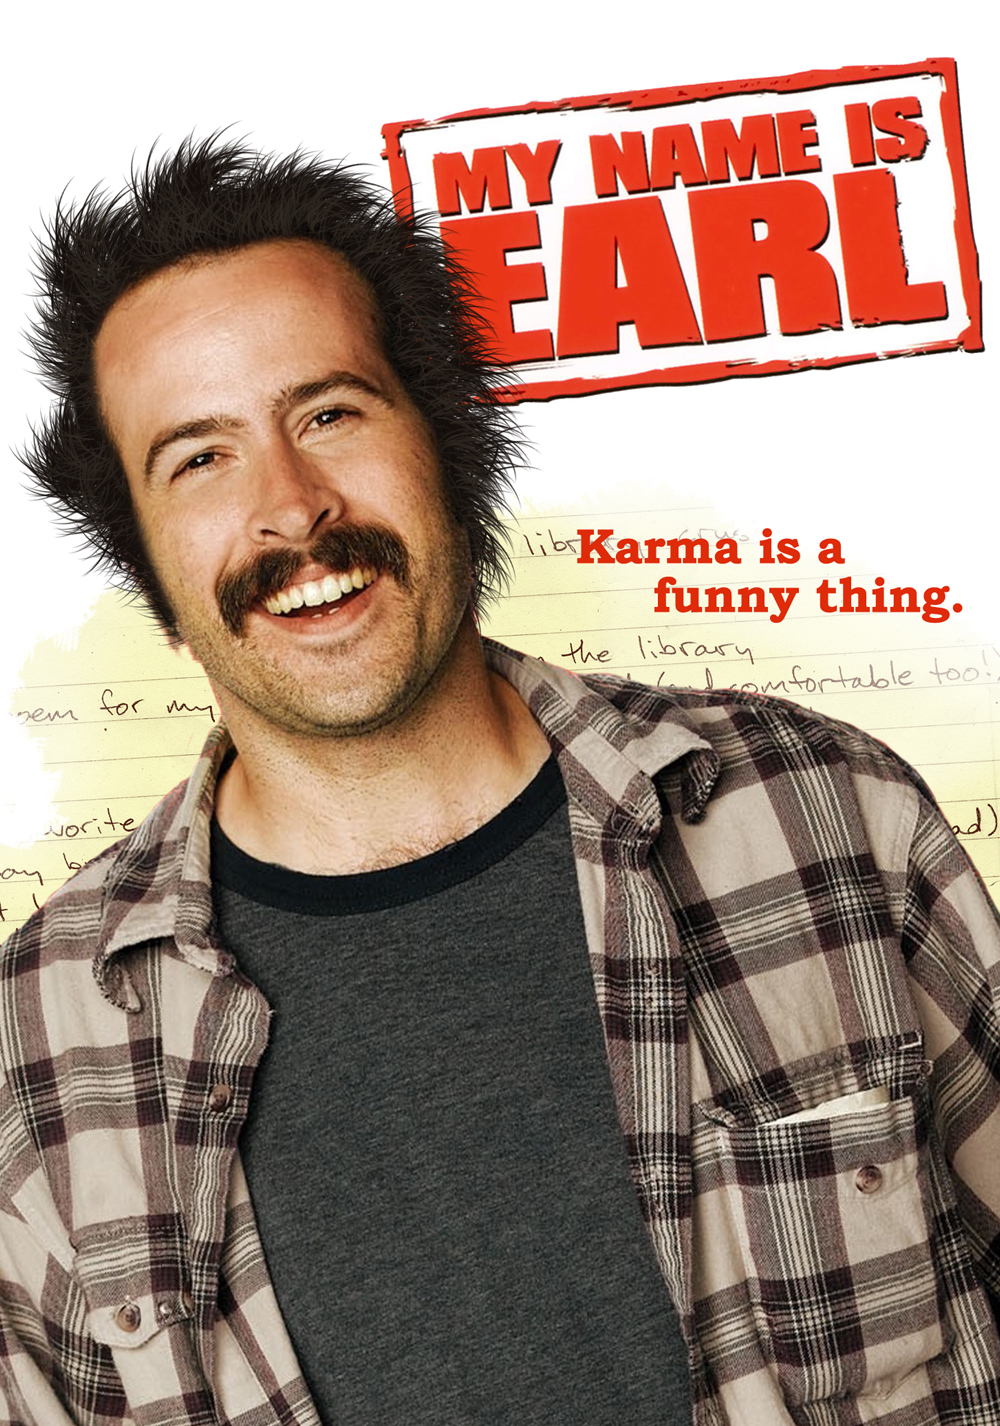 My Name Is Earl Backgrounds, Compatible - PC, Mobile, Gadgets| 1000x1426 px